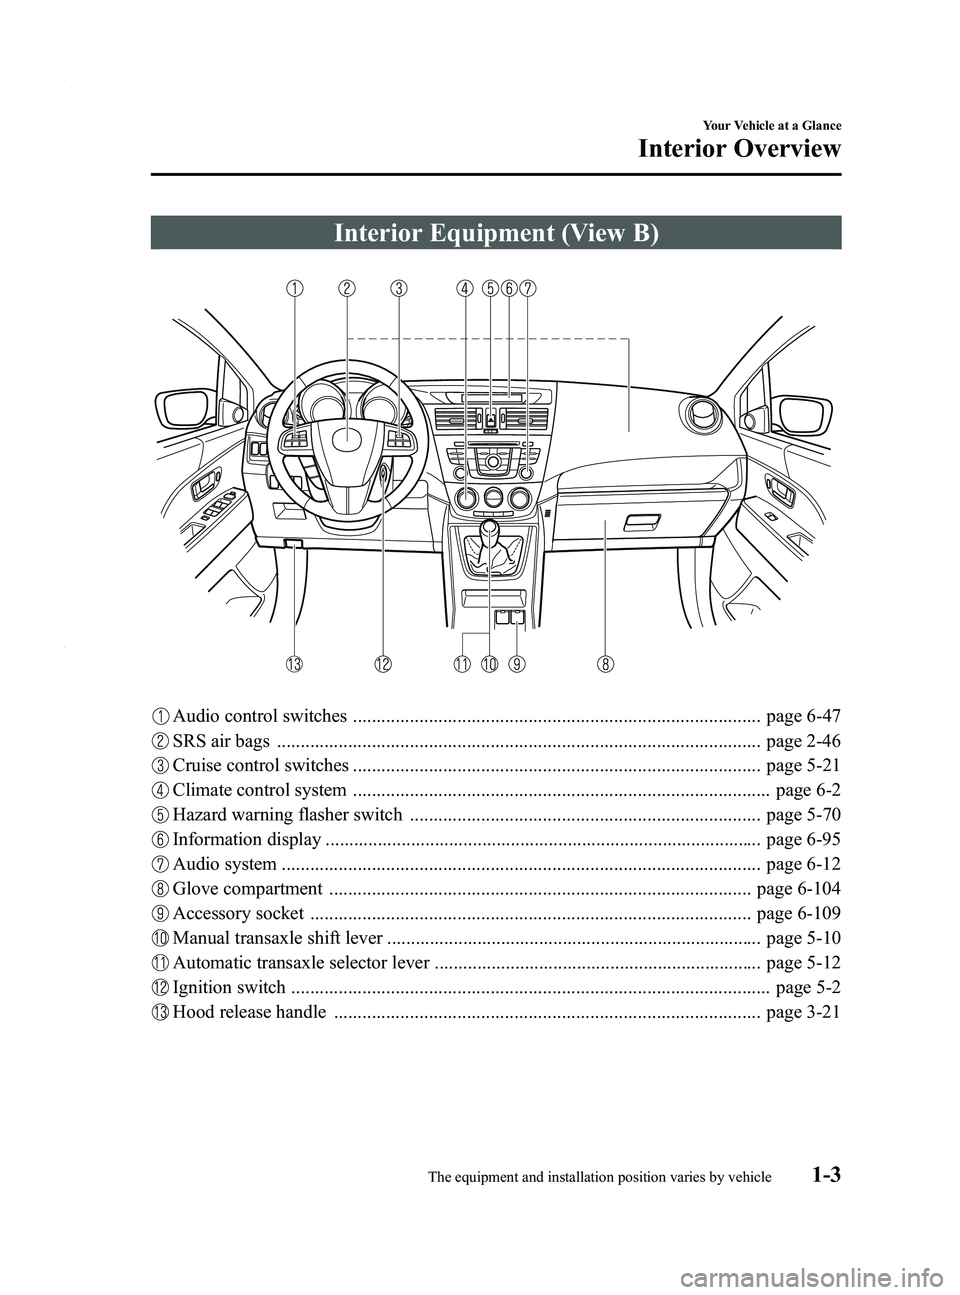 MAZDA MODEL 5 2015  Owners Manual Black plate (9,1)
Interior Equipment (View B)
Audio control switches ...................................................................................... page 6-47
SRS air bags .....................